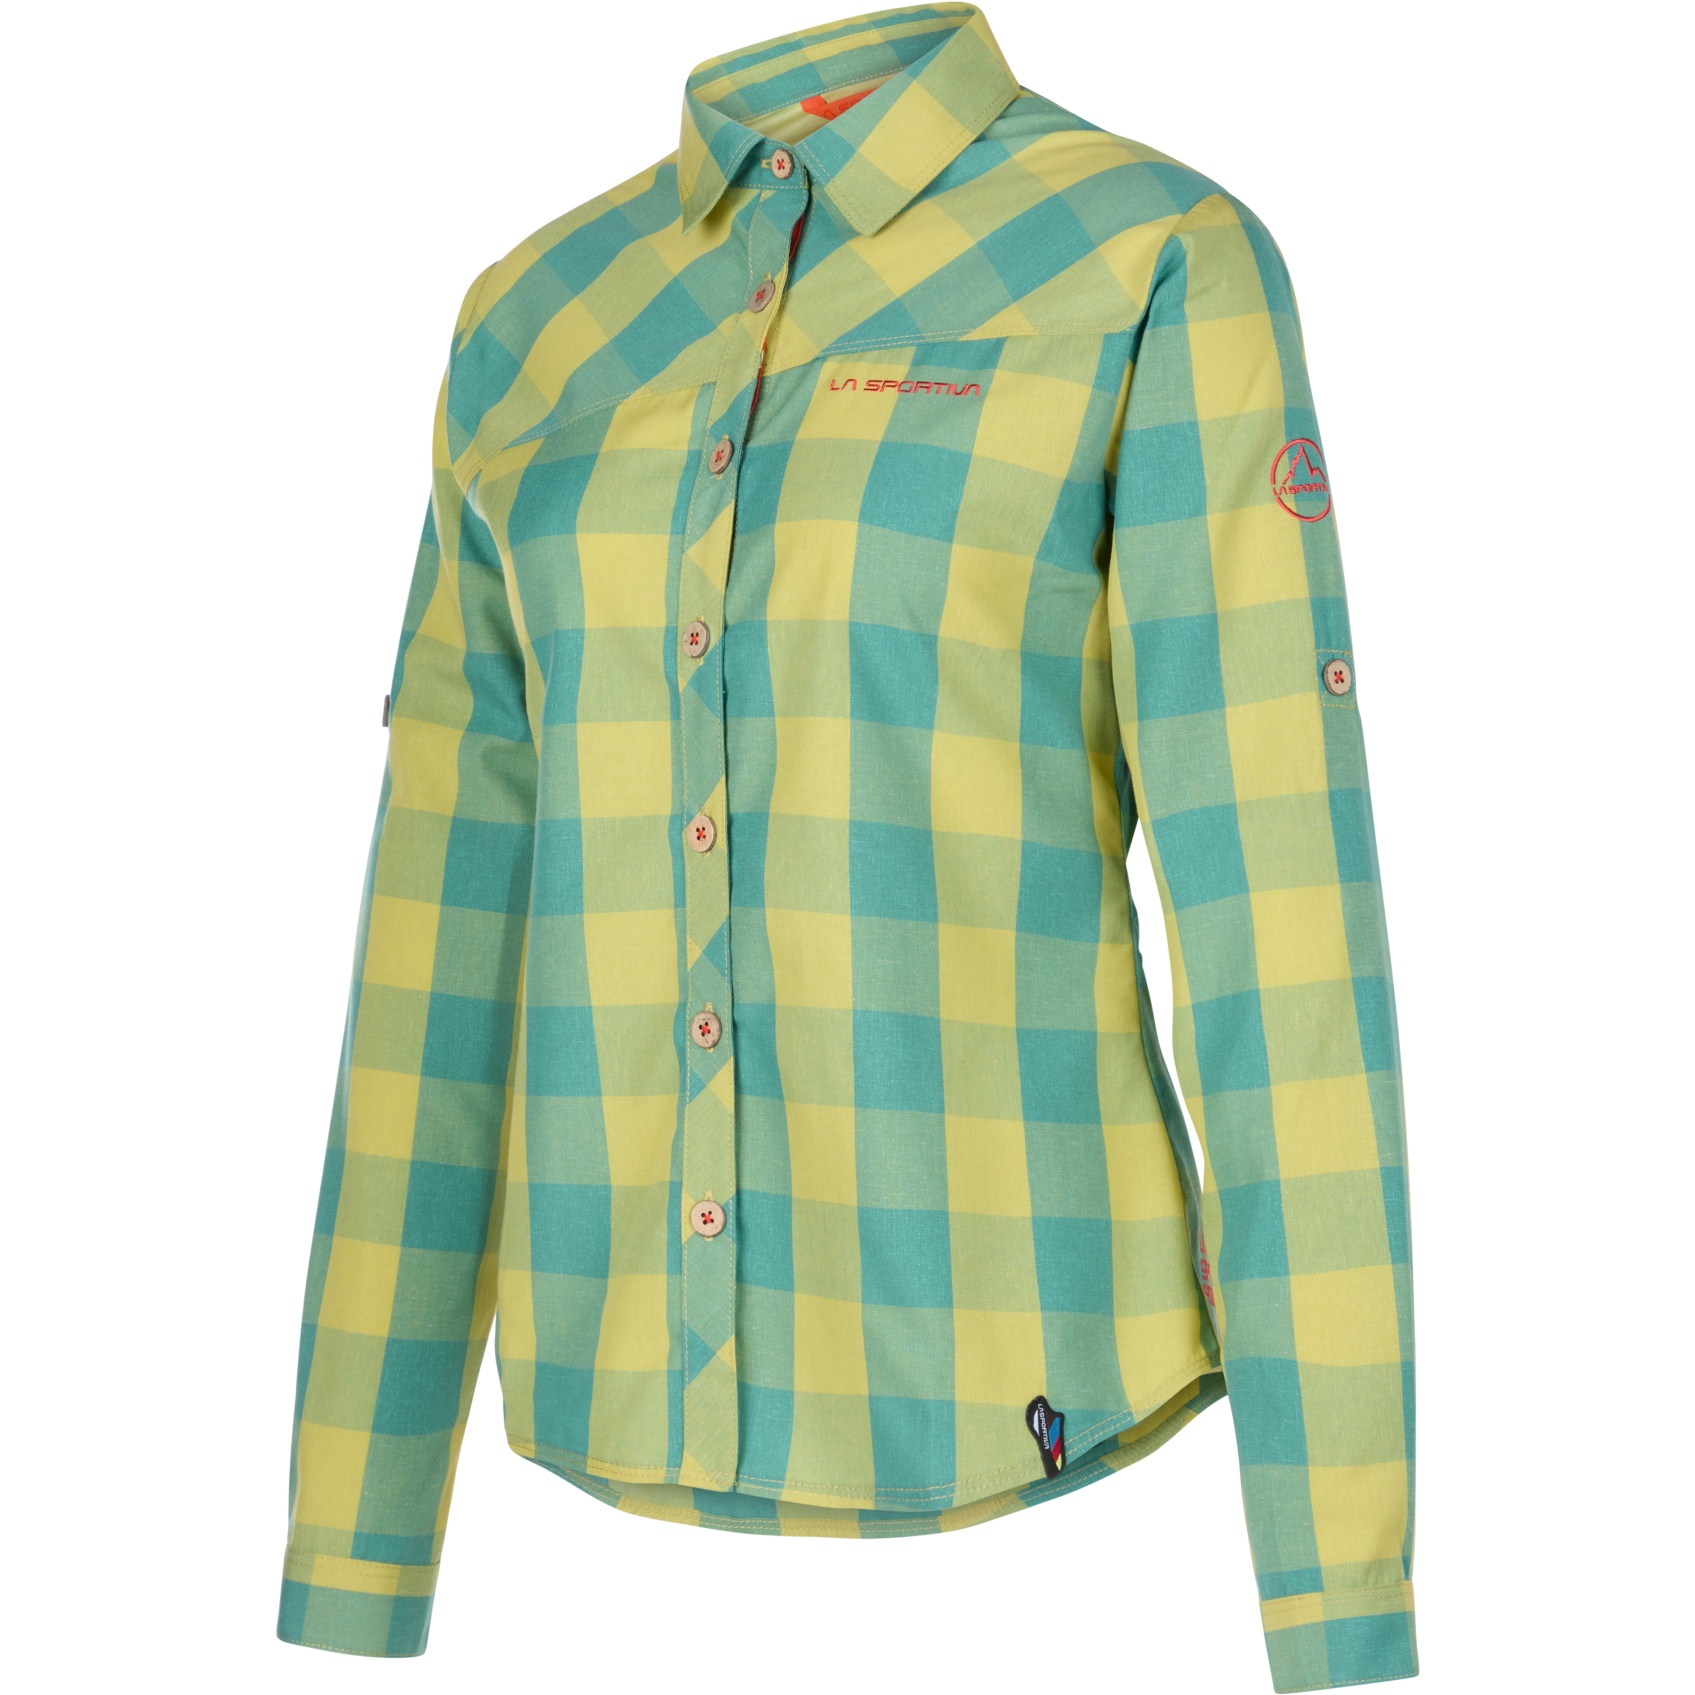 Picture of La Sportiva Andes Longsleeve Shirt Women - Lagoon/Cherry Tomato